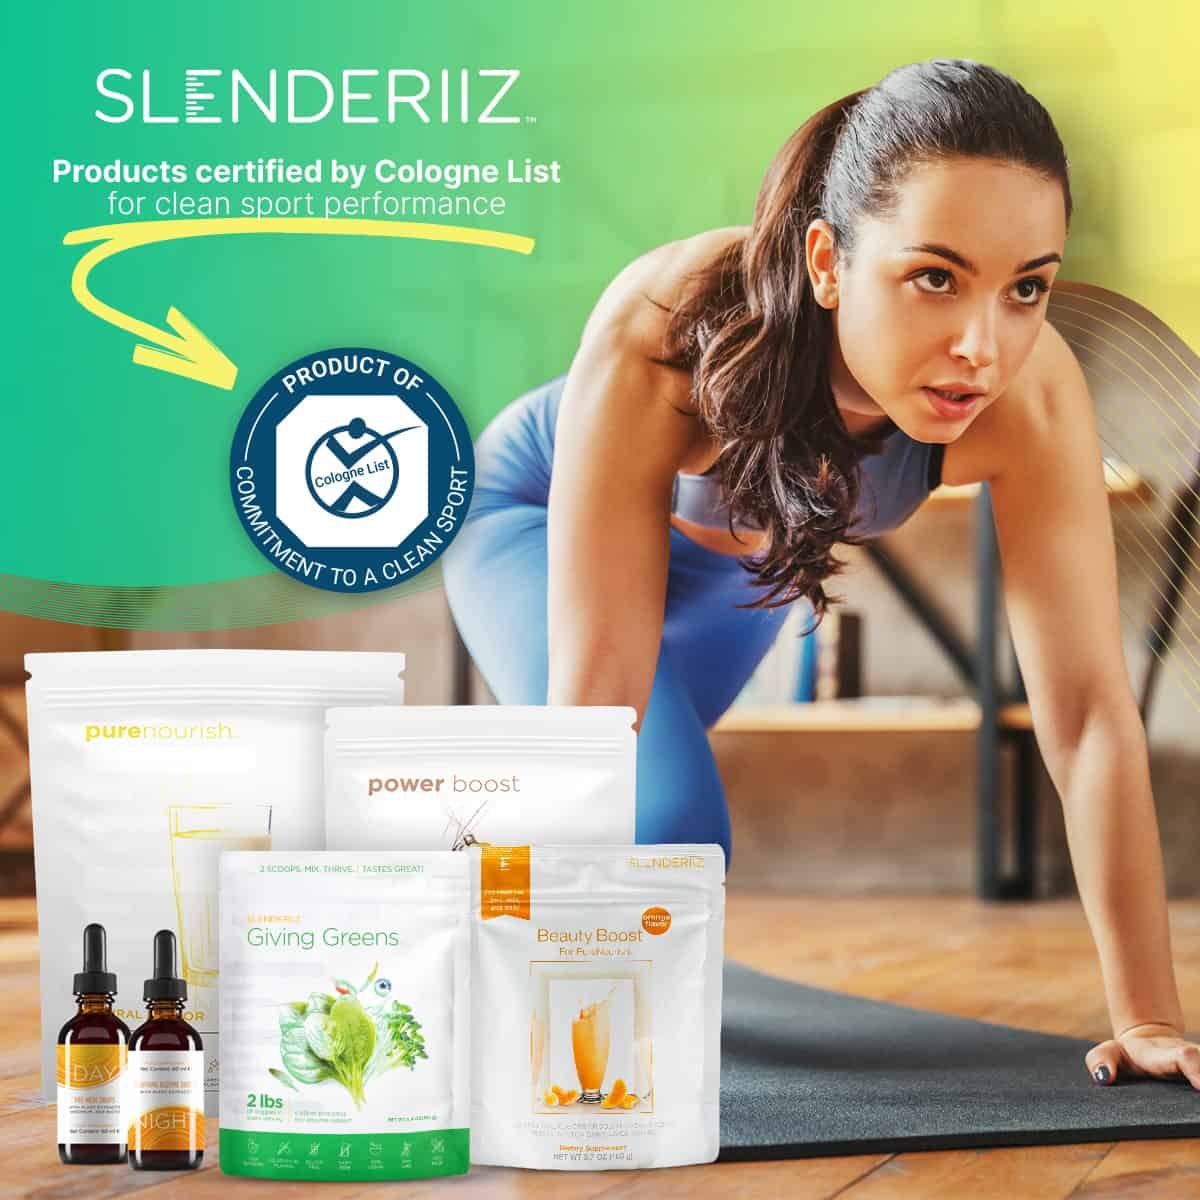 Slenderiiz Products Certified by Cologne List